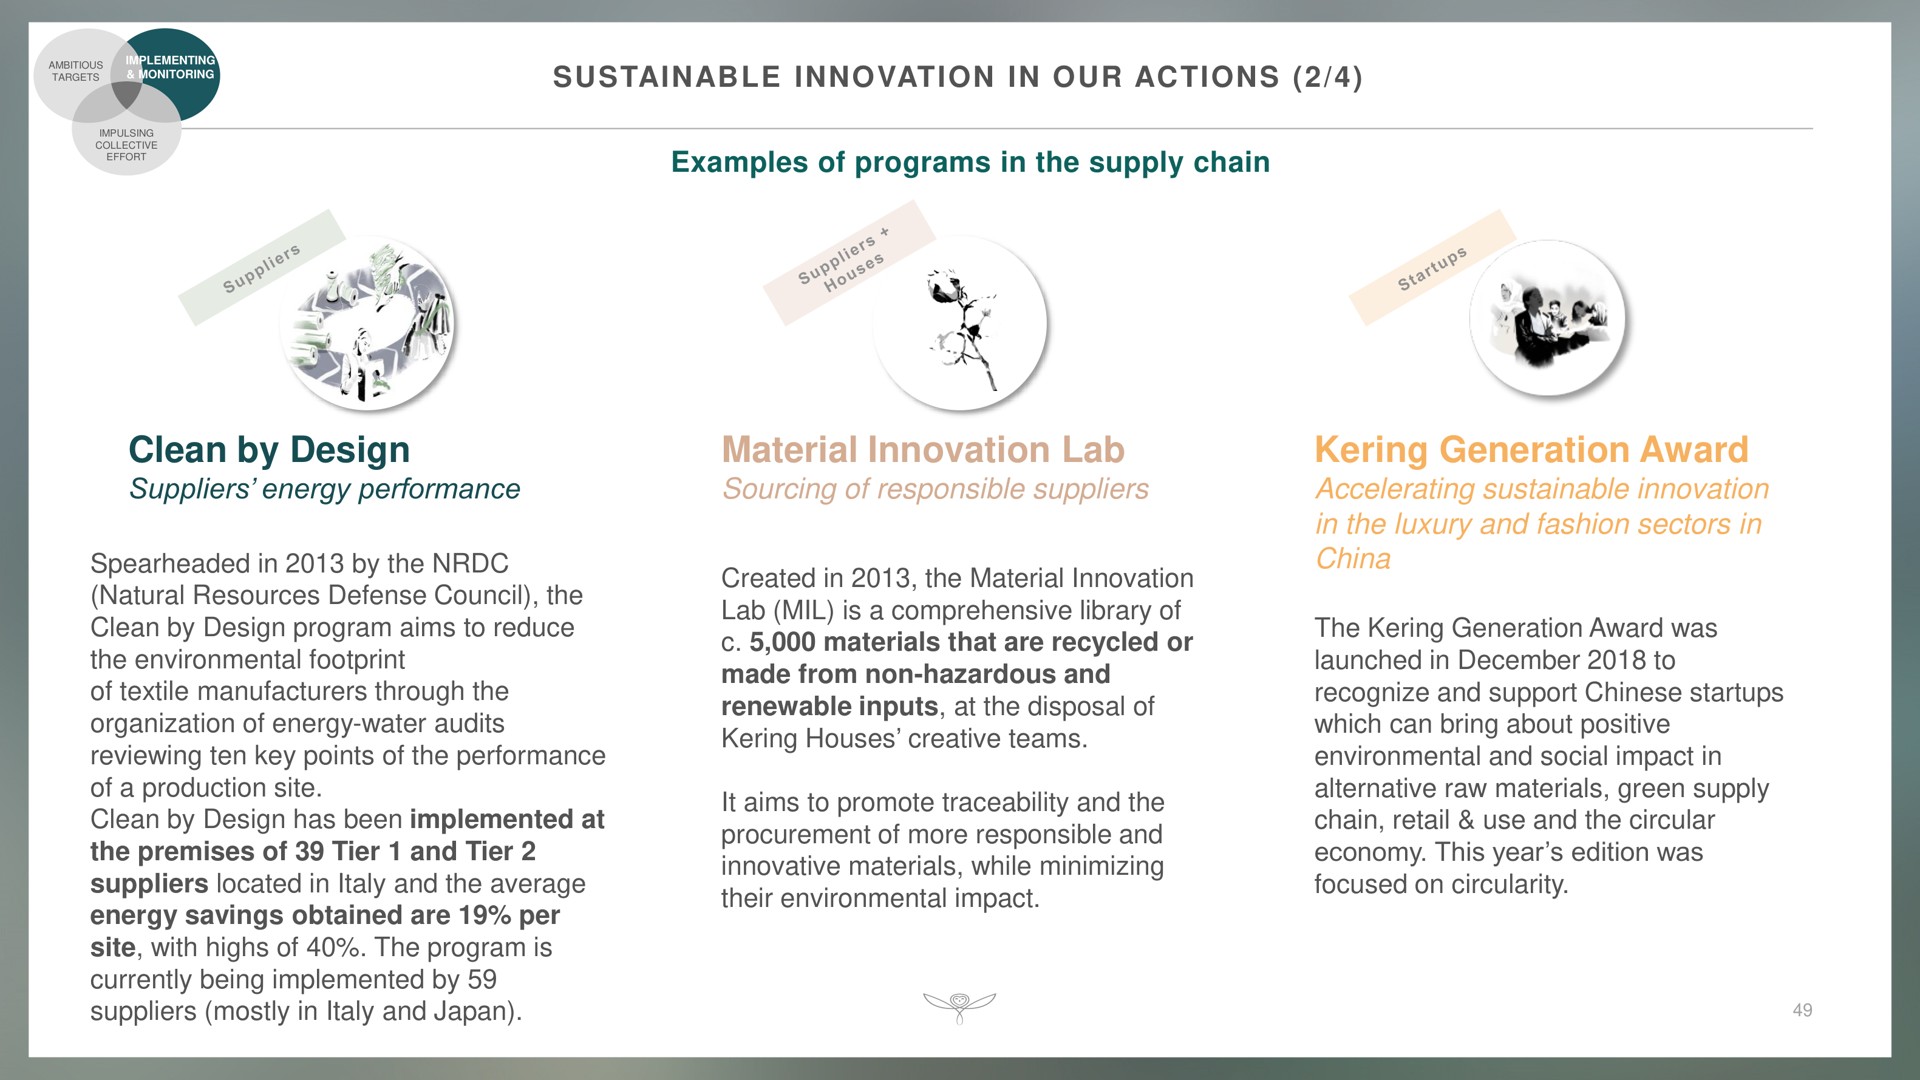 sustainable innovation in our actions examples of programs in the supply chain clean by design suppliers energy performance material innovation lab sourcing of responsible suppliers spearheaded in by the natural resources defense council the clean by design program aims to reduce the environmental footprint of textile manufacturers through the organization of energy water audits reviewing ten key points of the performance of a production site clean by design has been implemented at the premises of tier and tier suppliers located in and the average energy savings obtained are per site with highs of the program is currently being implemented by suppliers mostly in and japan created in the material innovation lab mil is a comprehensive library of materials that are recycled or made from non hazardous and renewable inputs at the disposal of houses creative teams it aims to promote traceability and the procurement of more responsible and innovative materials while minimizing their environmental impact generation award accelerating sustainable innovation in the luxury and fashion sectors in china the generation award was launched in to recognize and support which can bring about positive environmental and social impact in alternative raw materials green supply chain retail use and the circular economy this year edition was focused on circularity | Kering